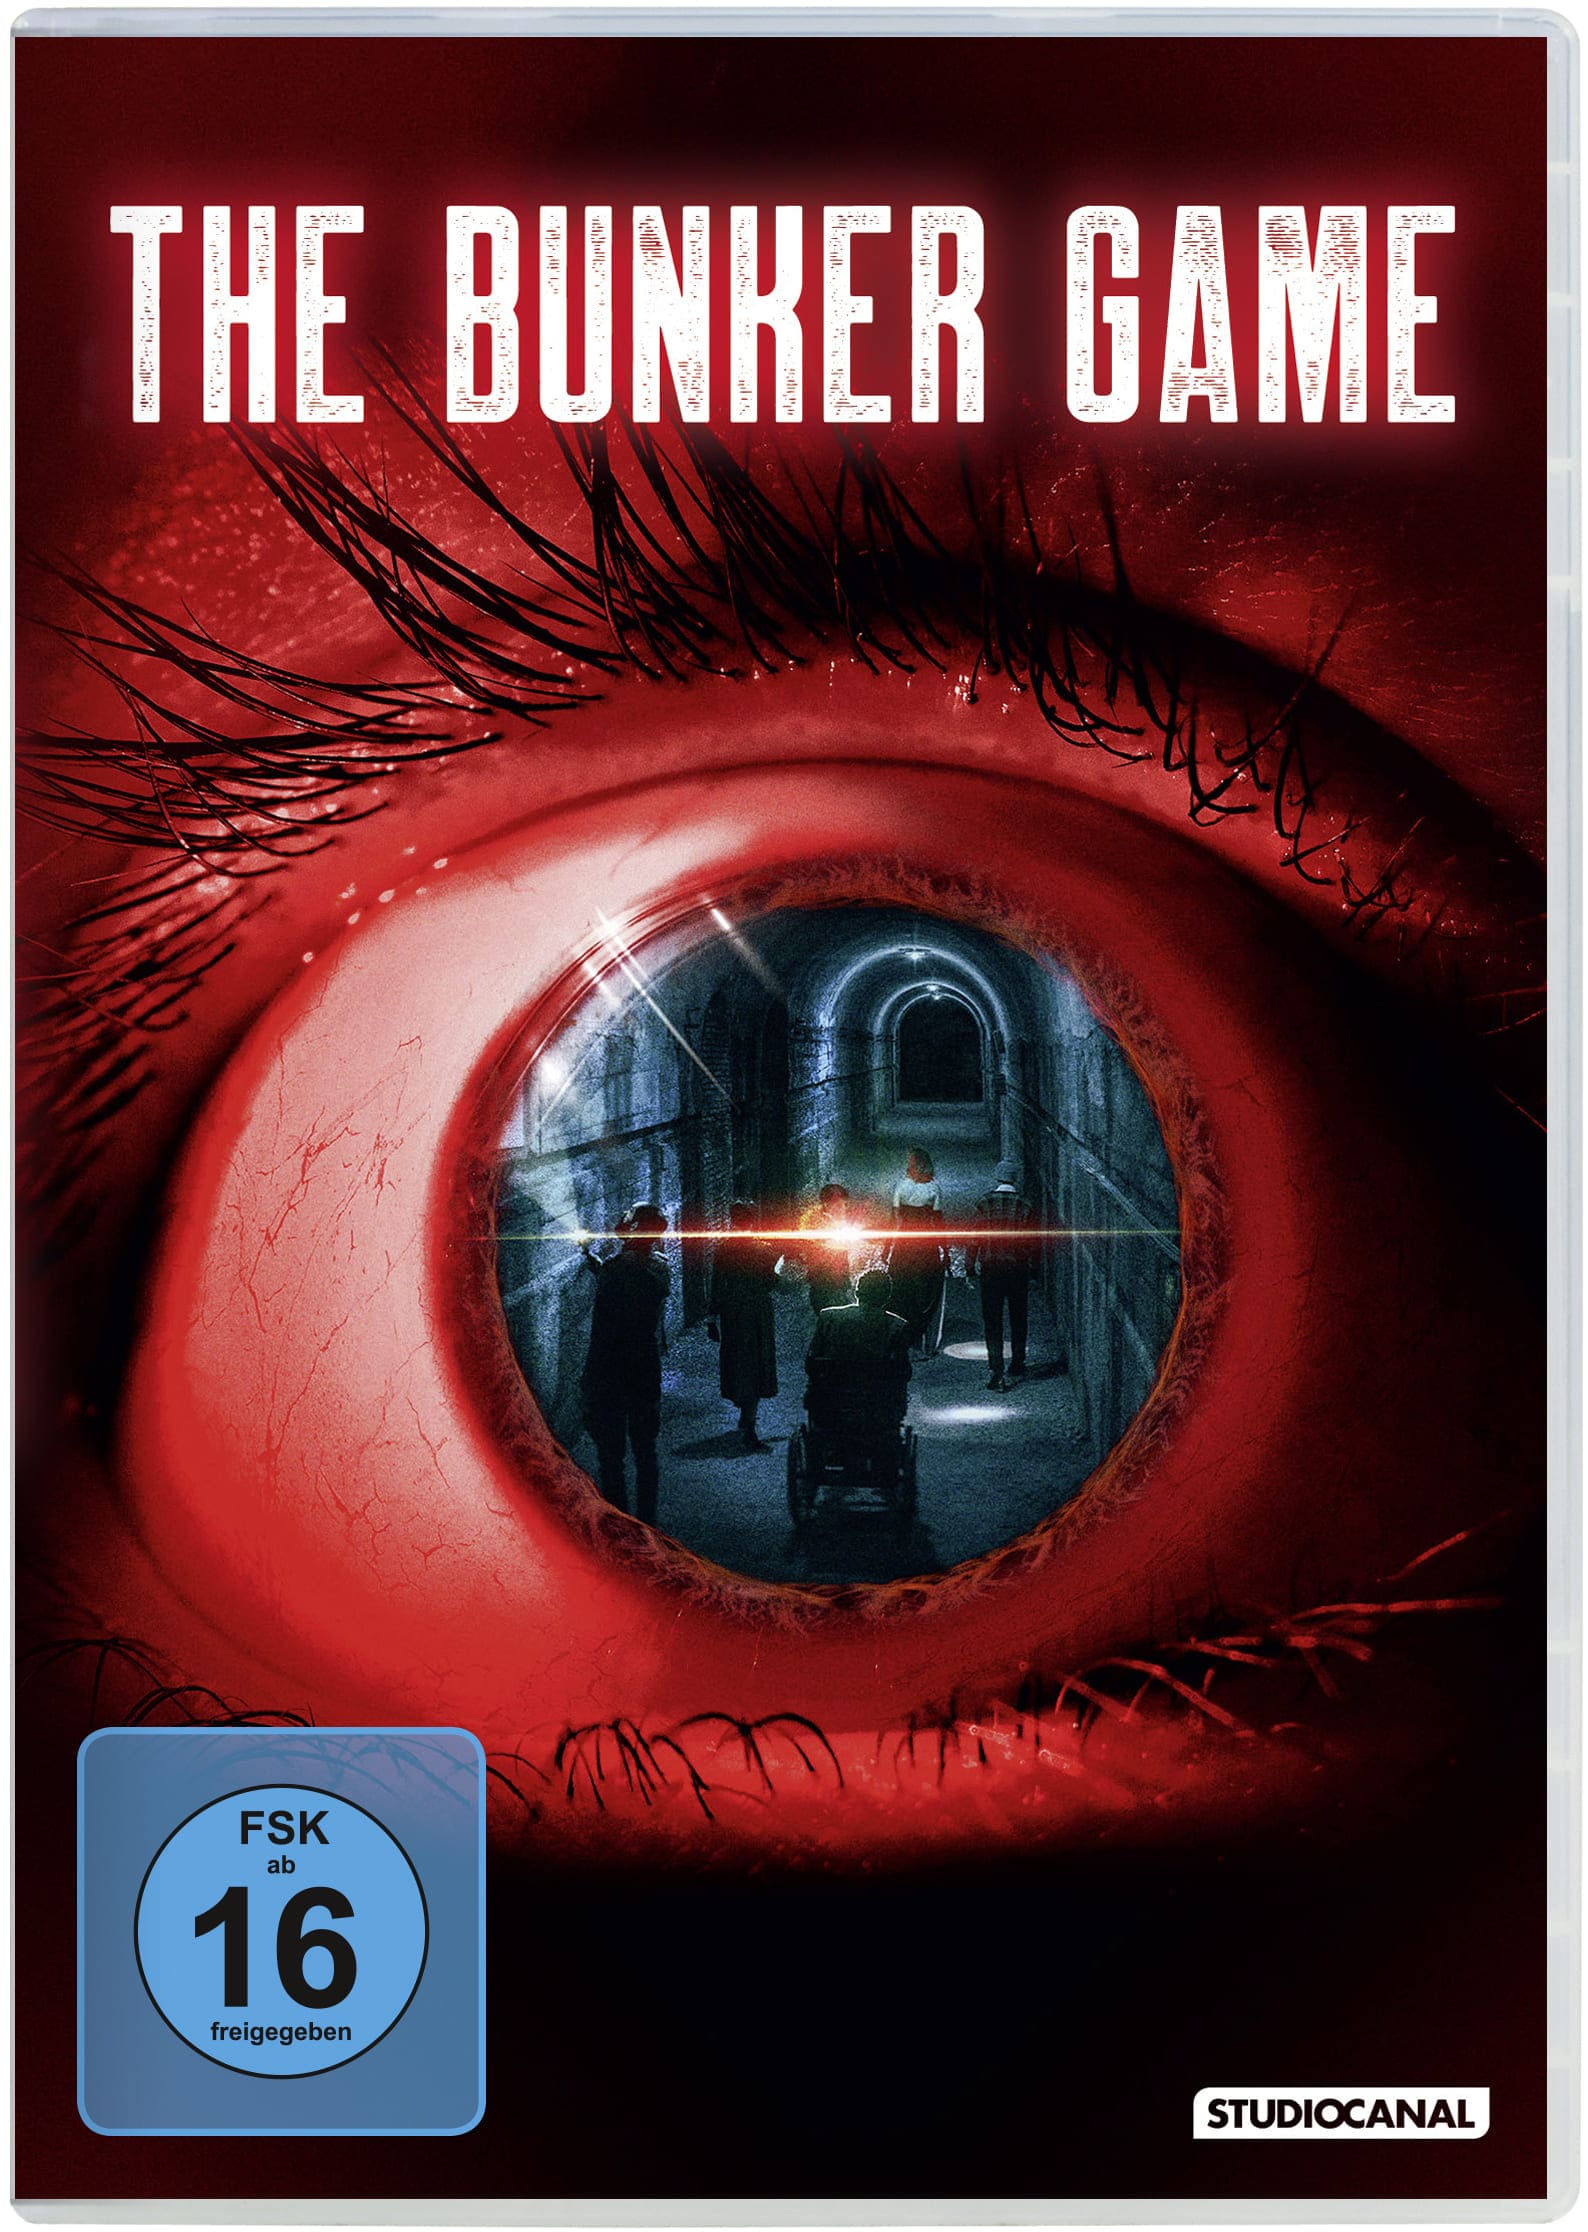 The Bunker Game (DVD)